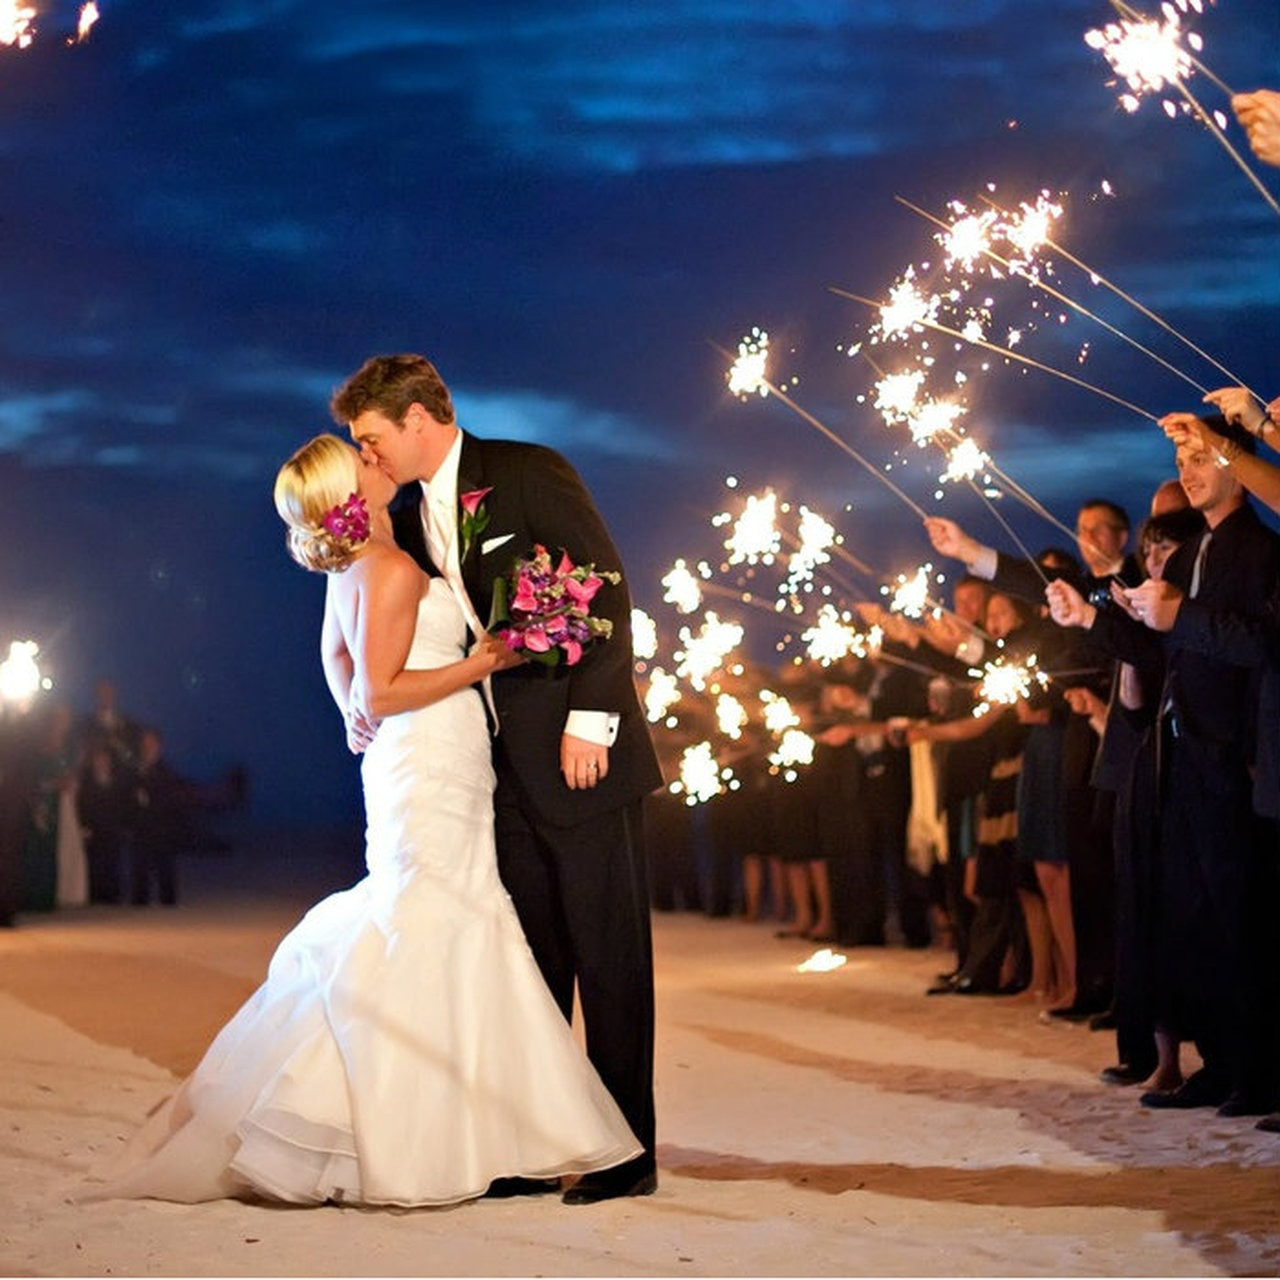 36 Inch Wedding Sparklers Cheap
 King of Sparklers